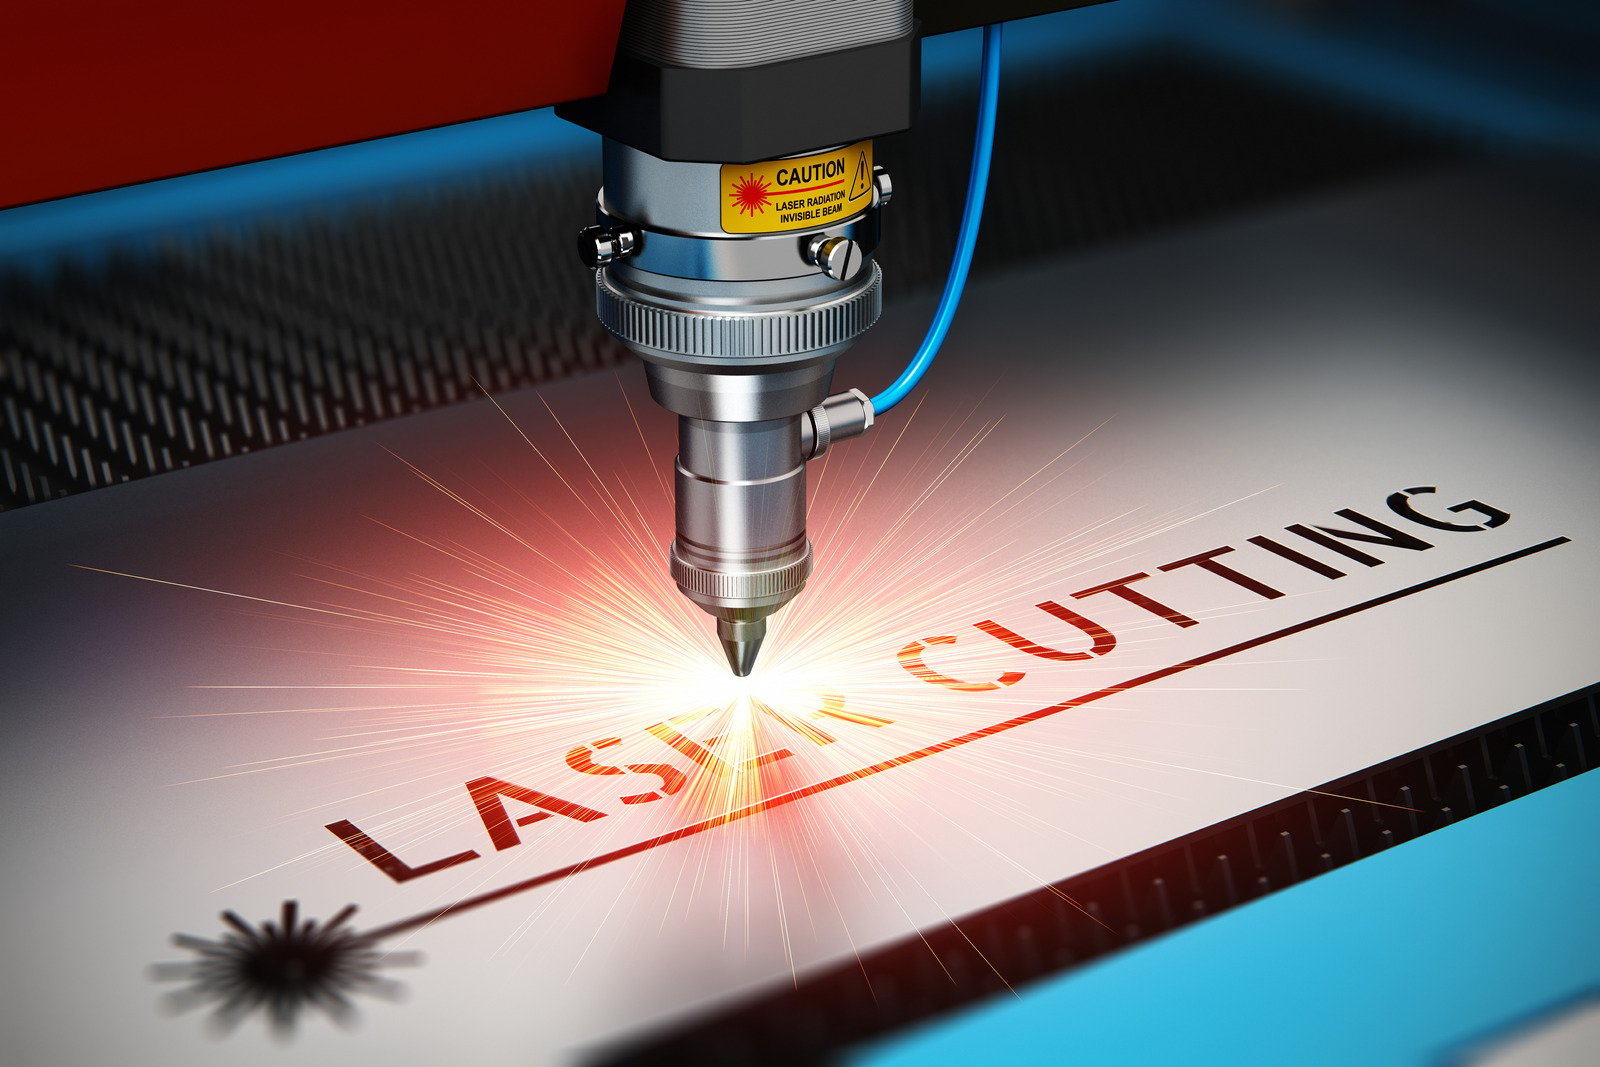 What Are the Pros and Cons of Laser Cutting?